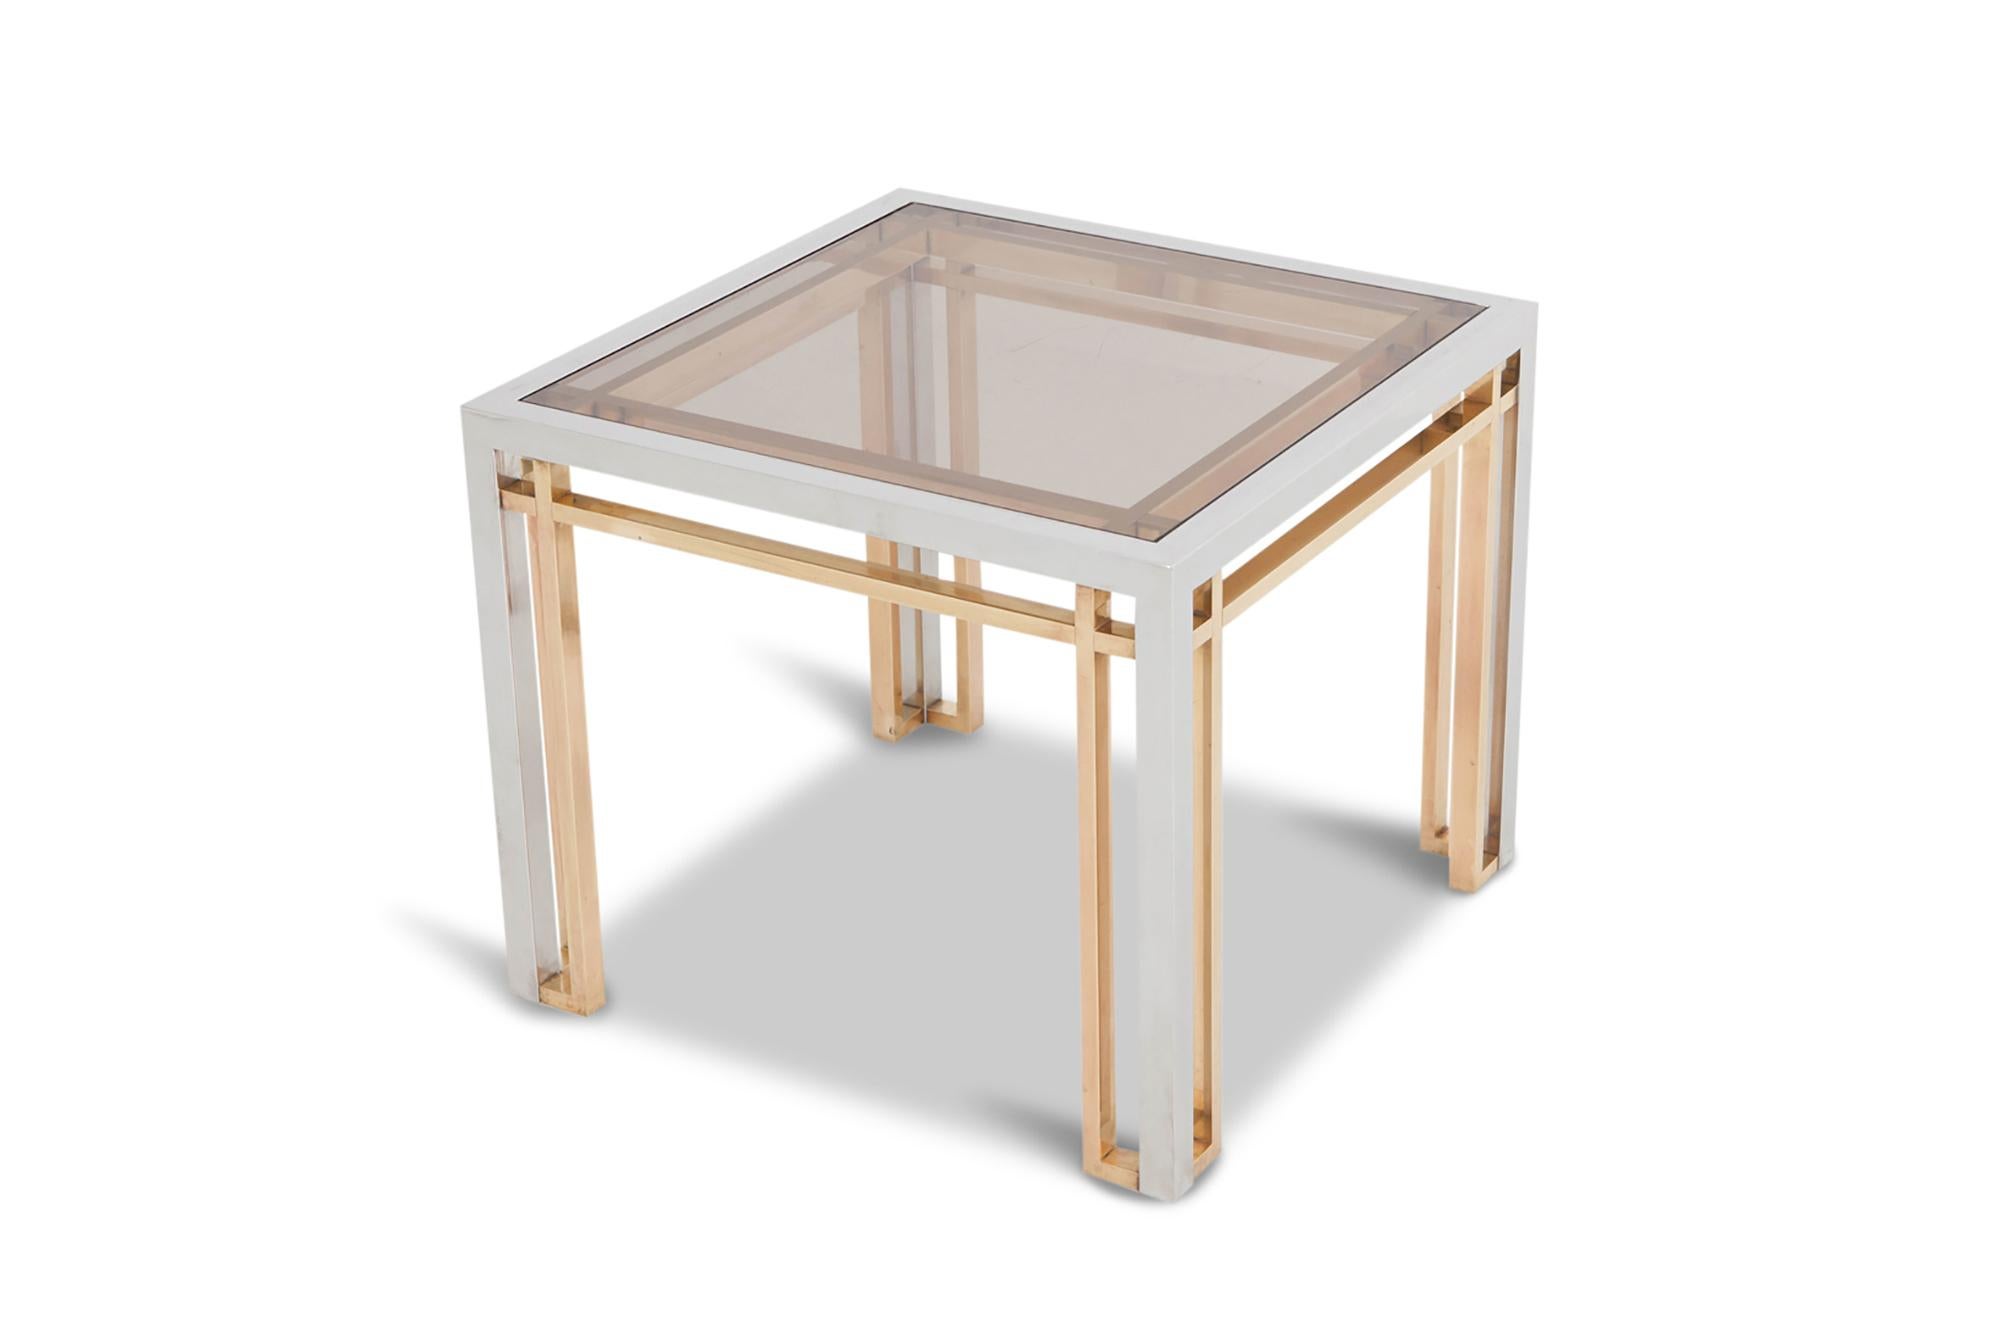 Romeo Rega Side Tables in Chrome, Brass and Glass In Excellent Condition For Sale In Antwerp, BE